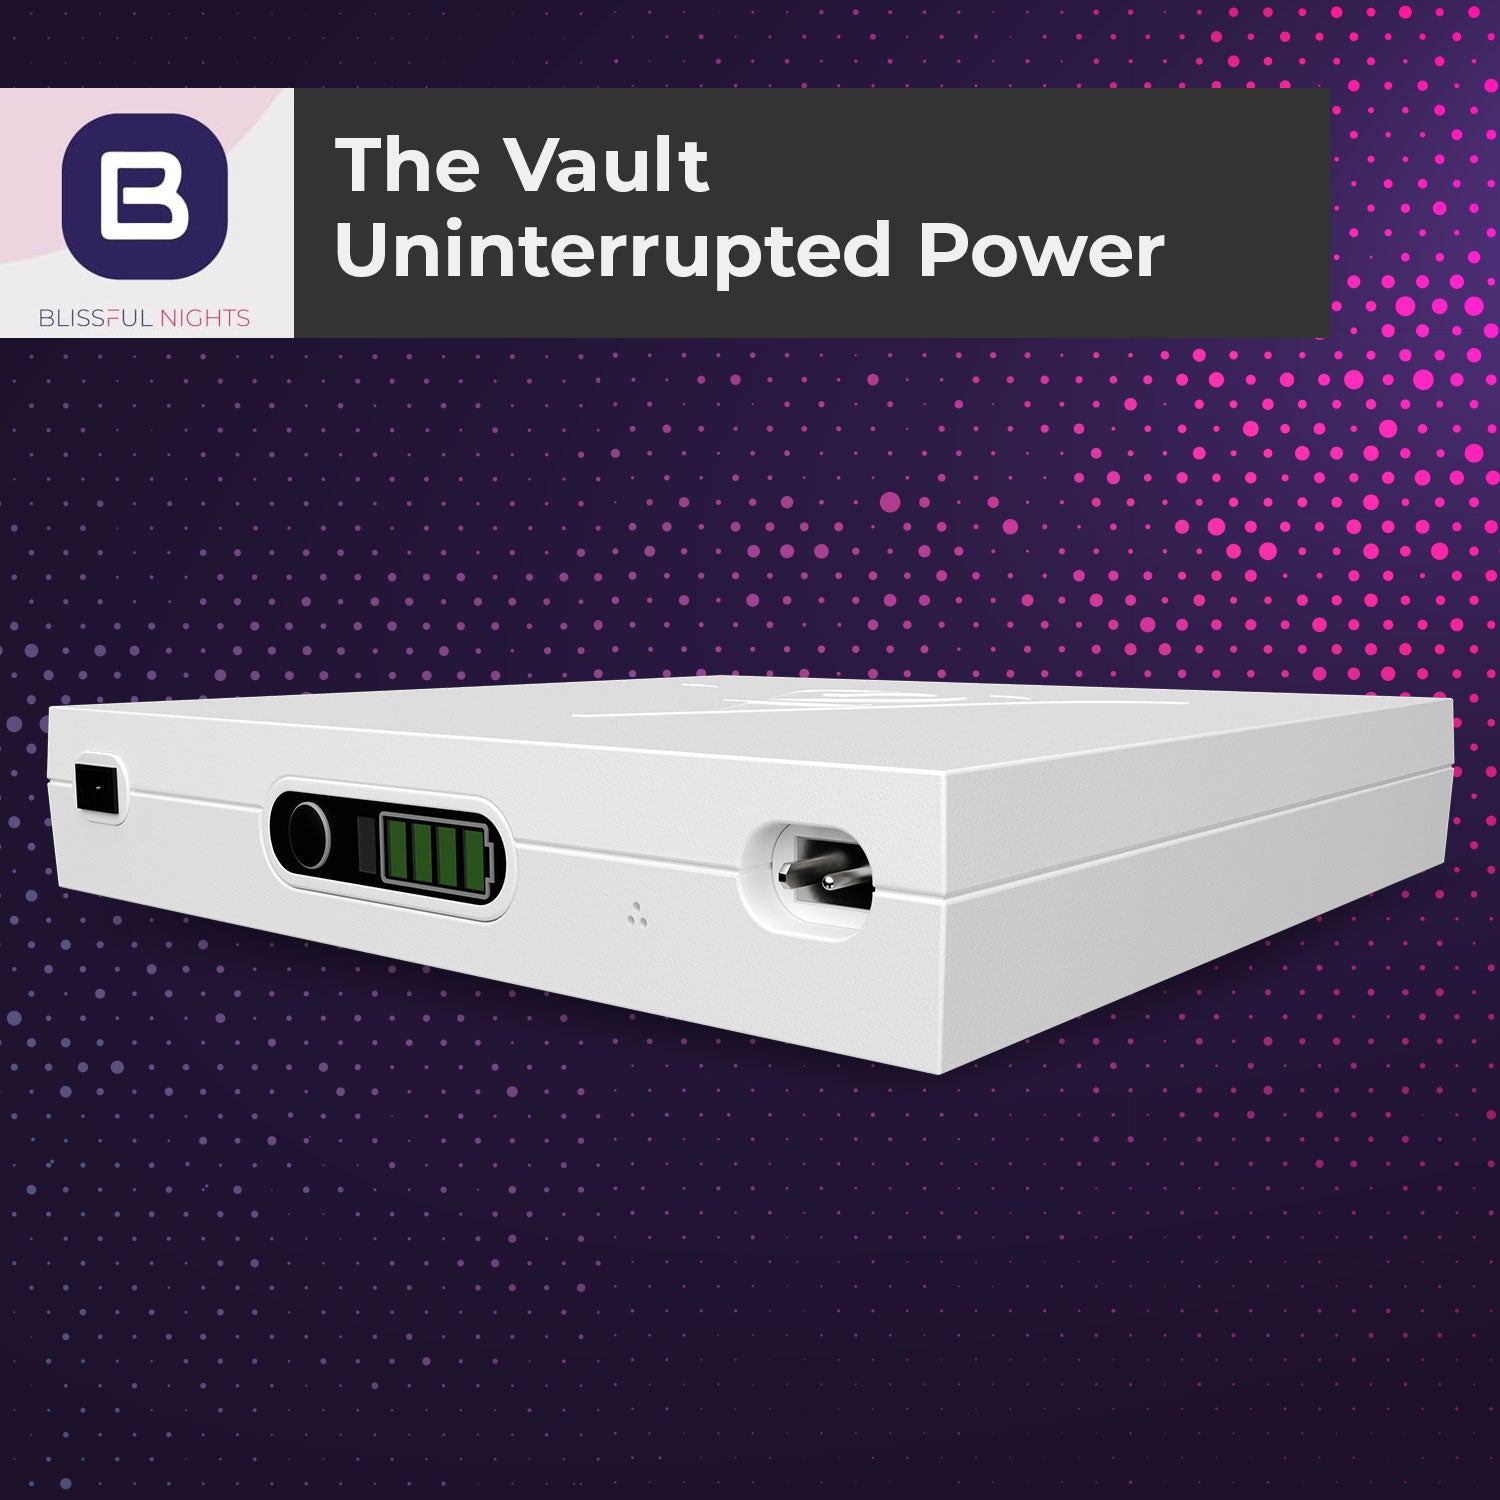 Blissful Nights The Vault Battery Backup - Uninterrupted power for your adjustable bed - BlissfulNights.com